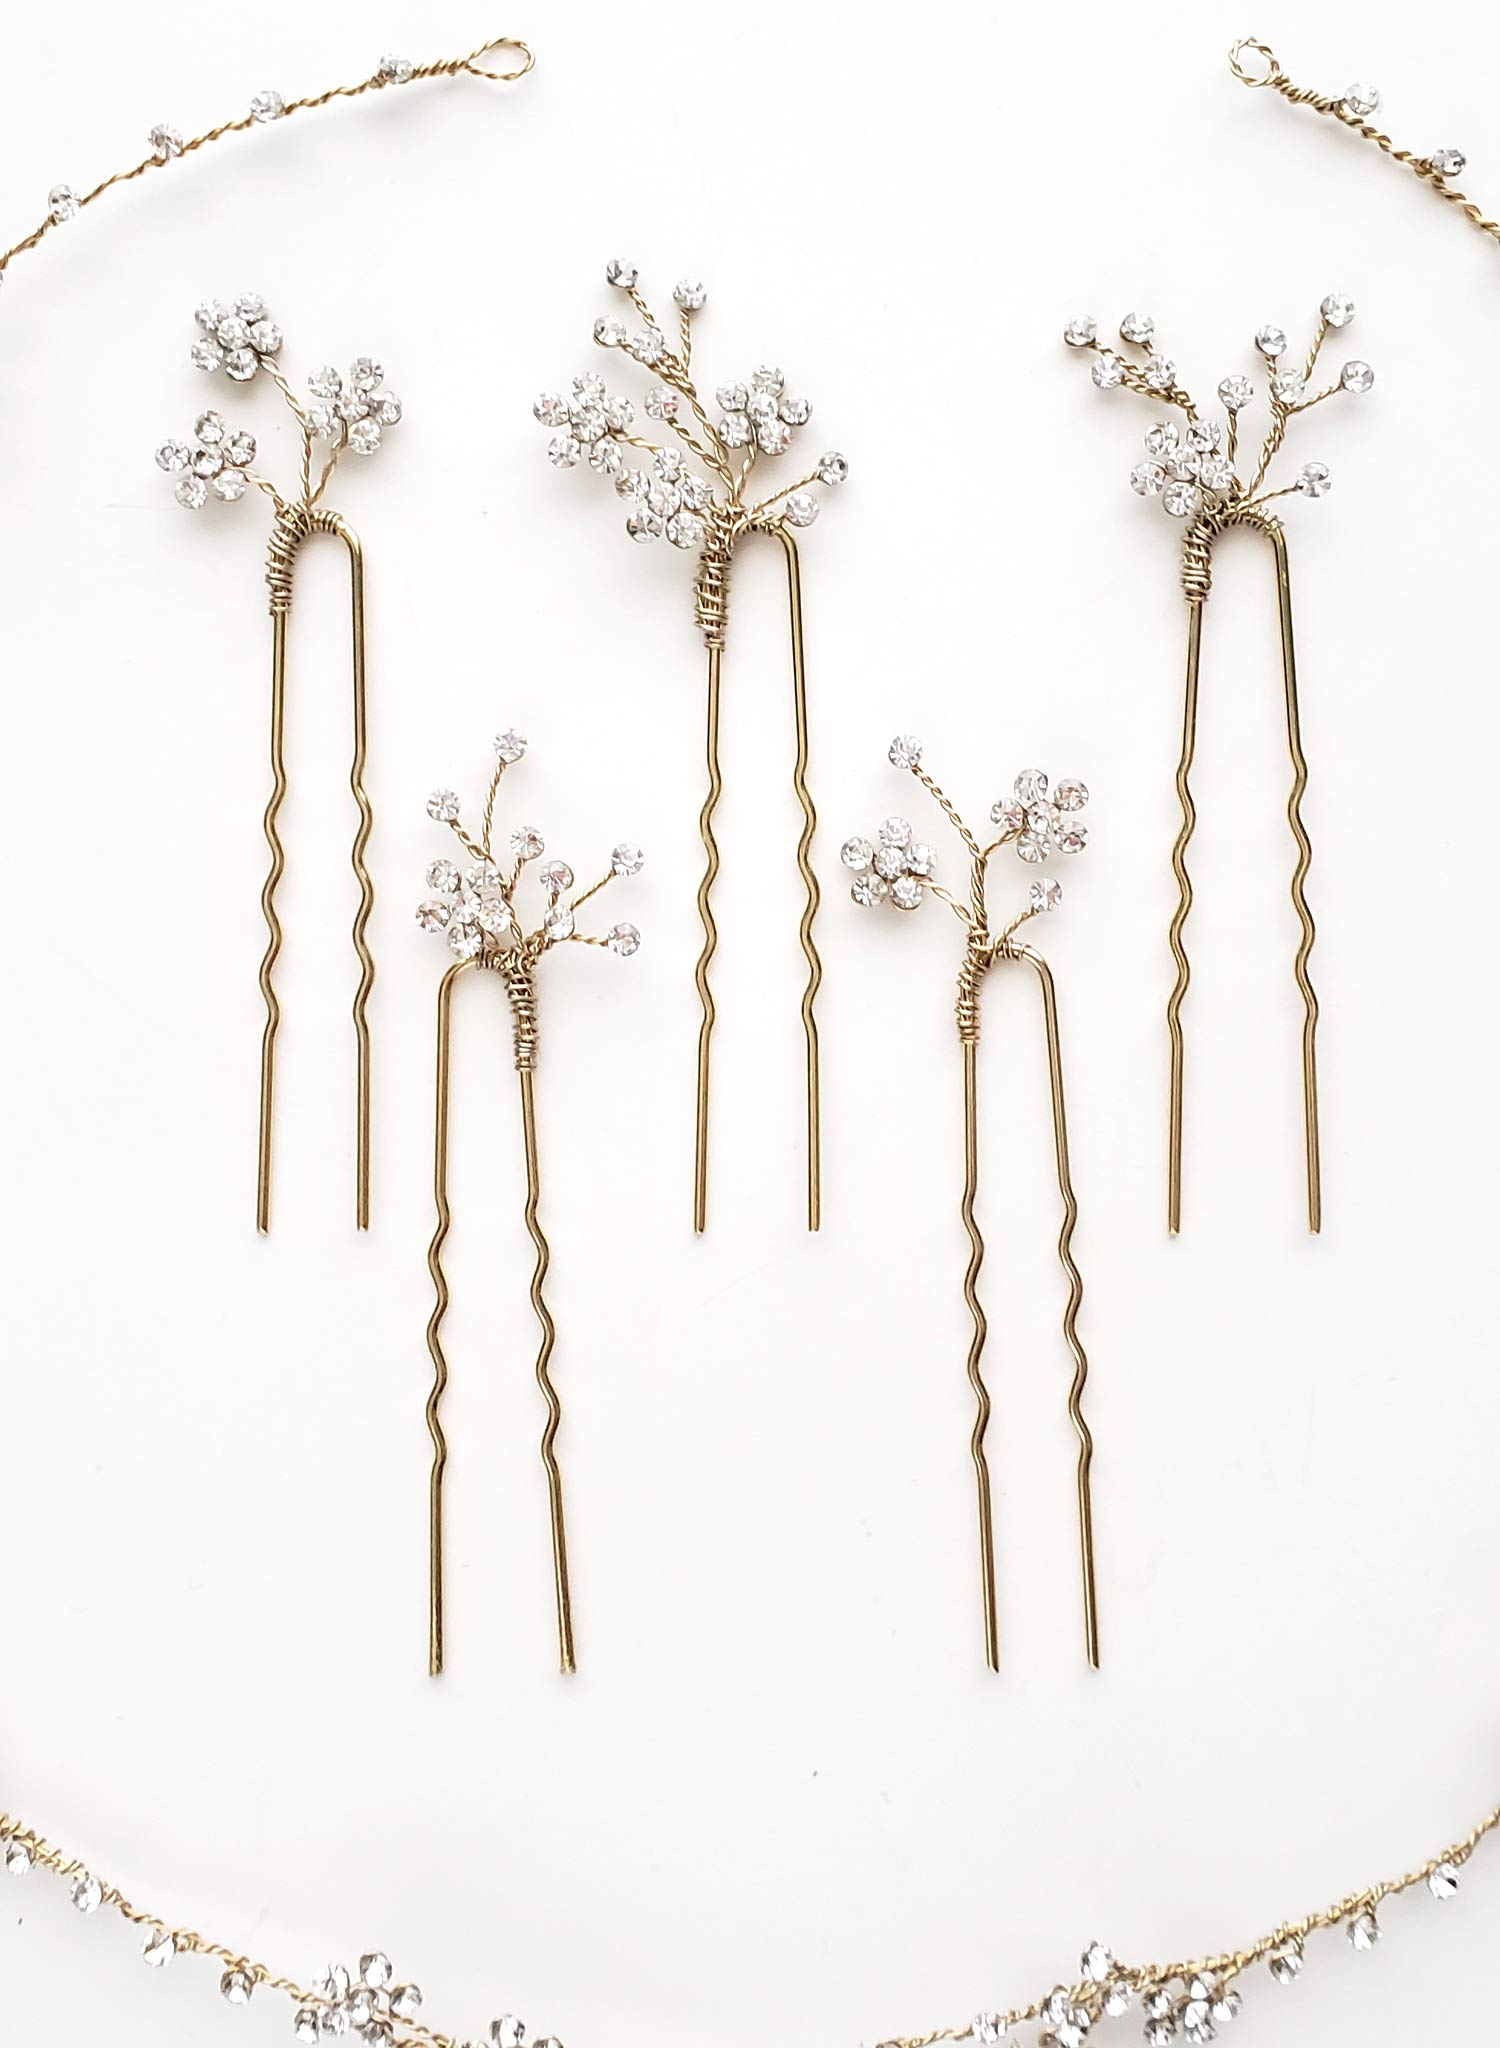 Twigs & Honey Bridal Handmade Flower Hair Pins - Hand Sculpted Simple Blossom Hair Pin Set of 5 - Style #2153